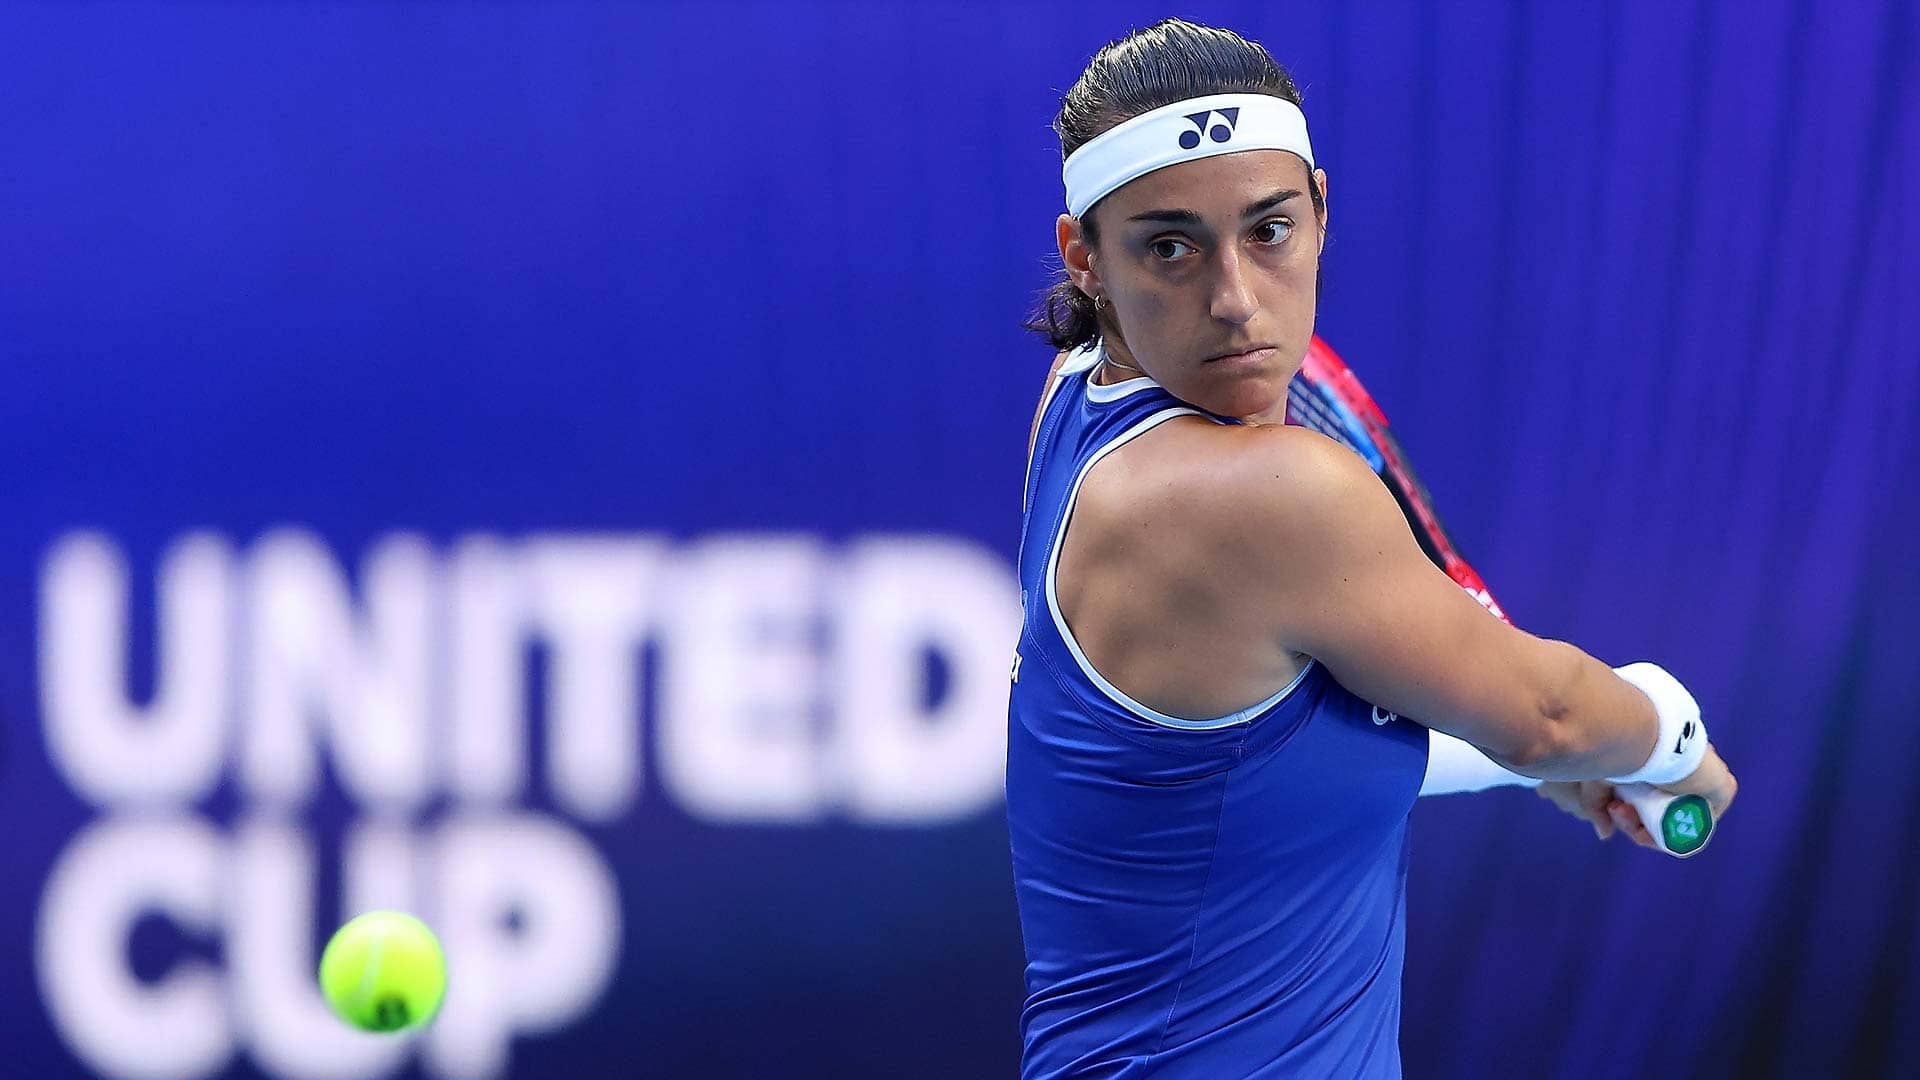 Caroline Garcia delivers an impressive performance on United Cup debut on Friday in Perth.